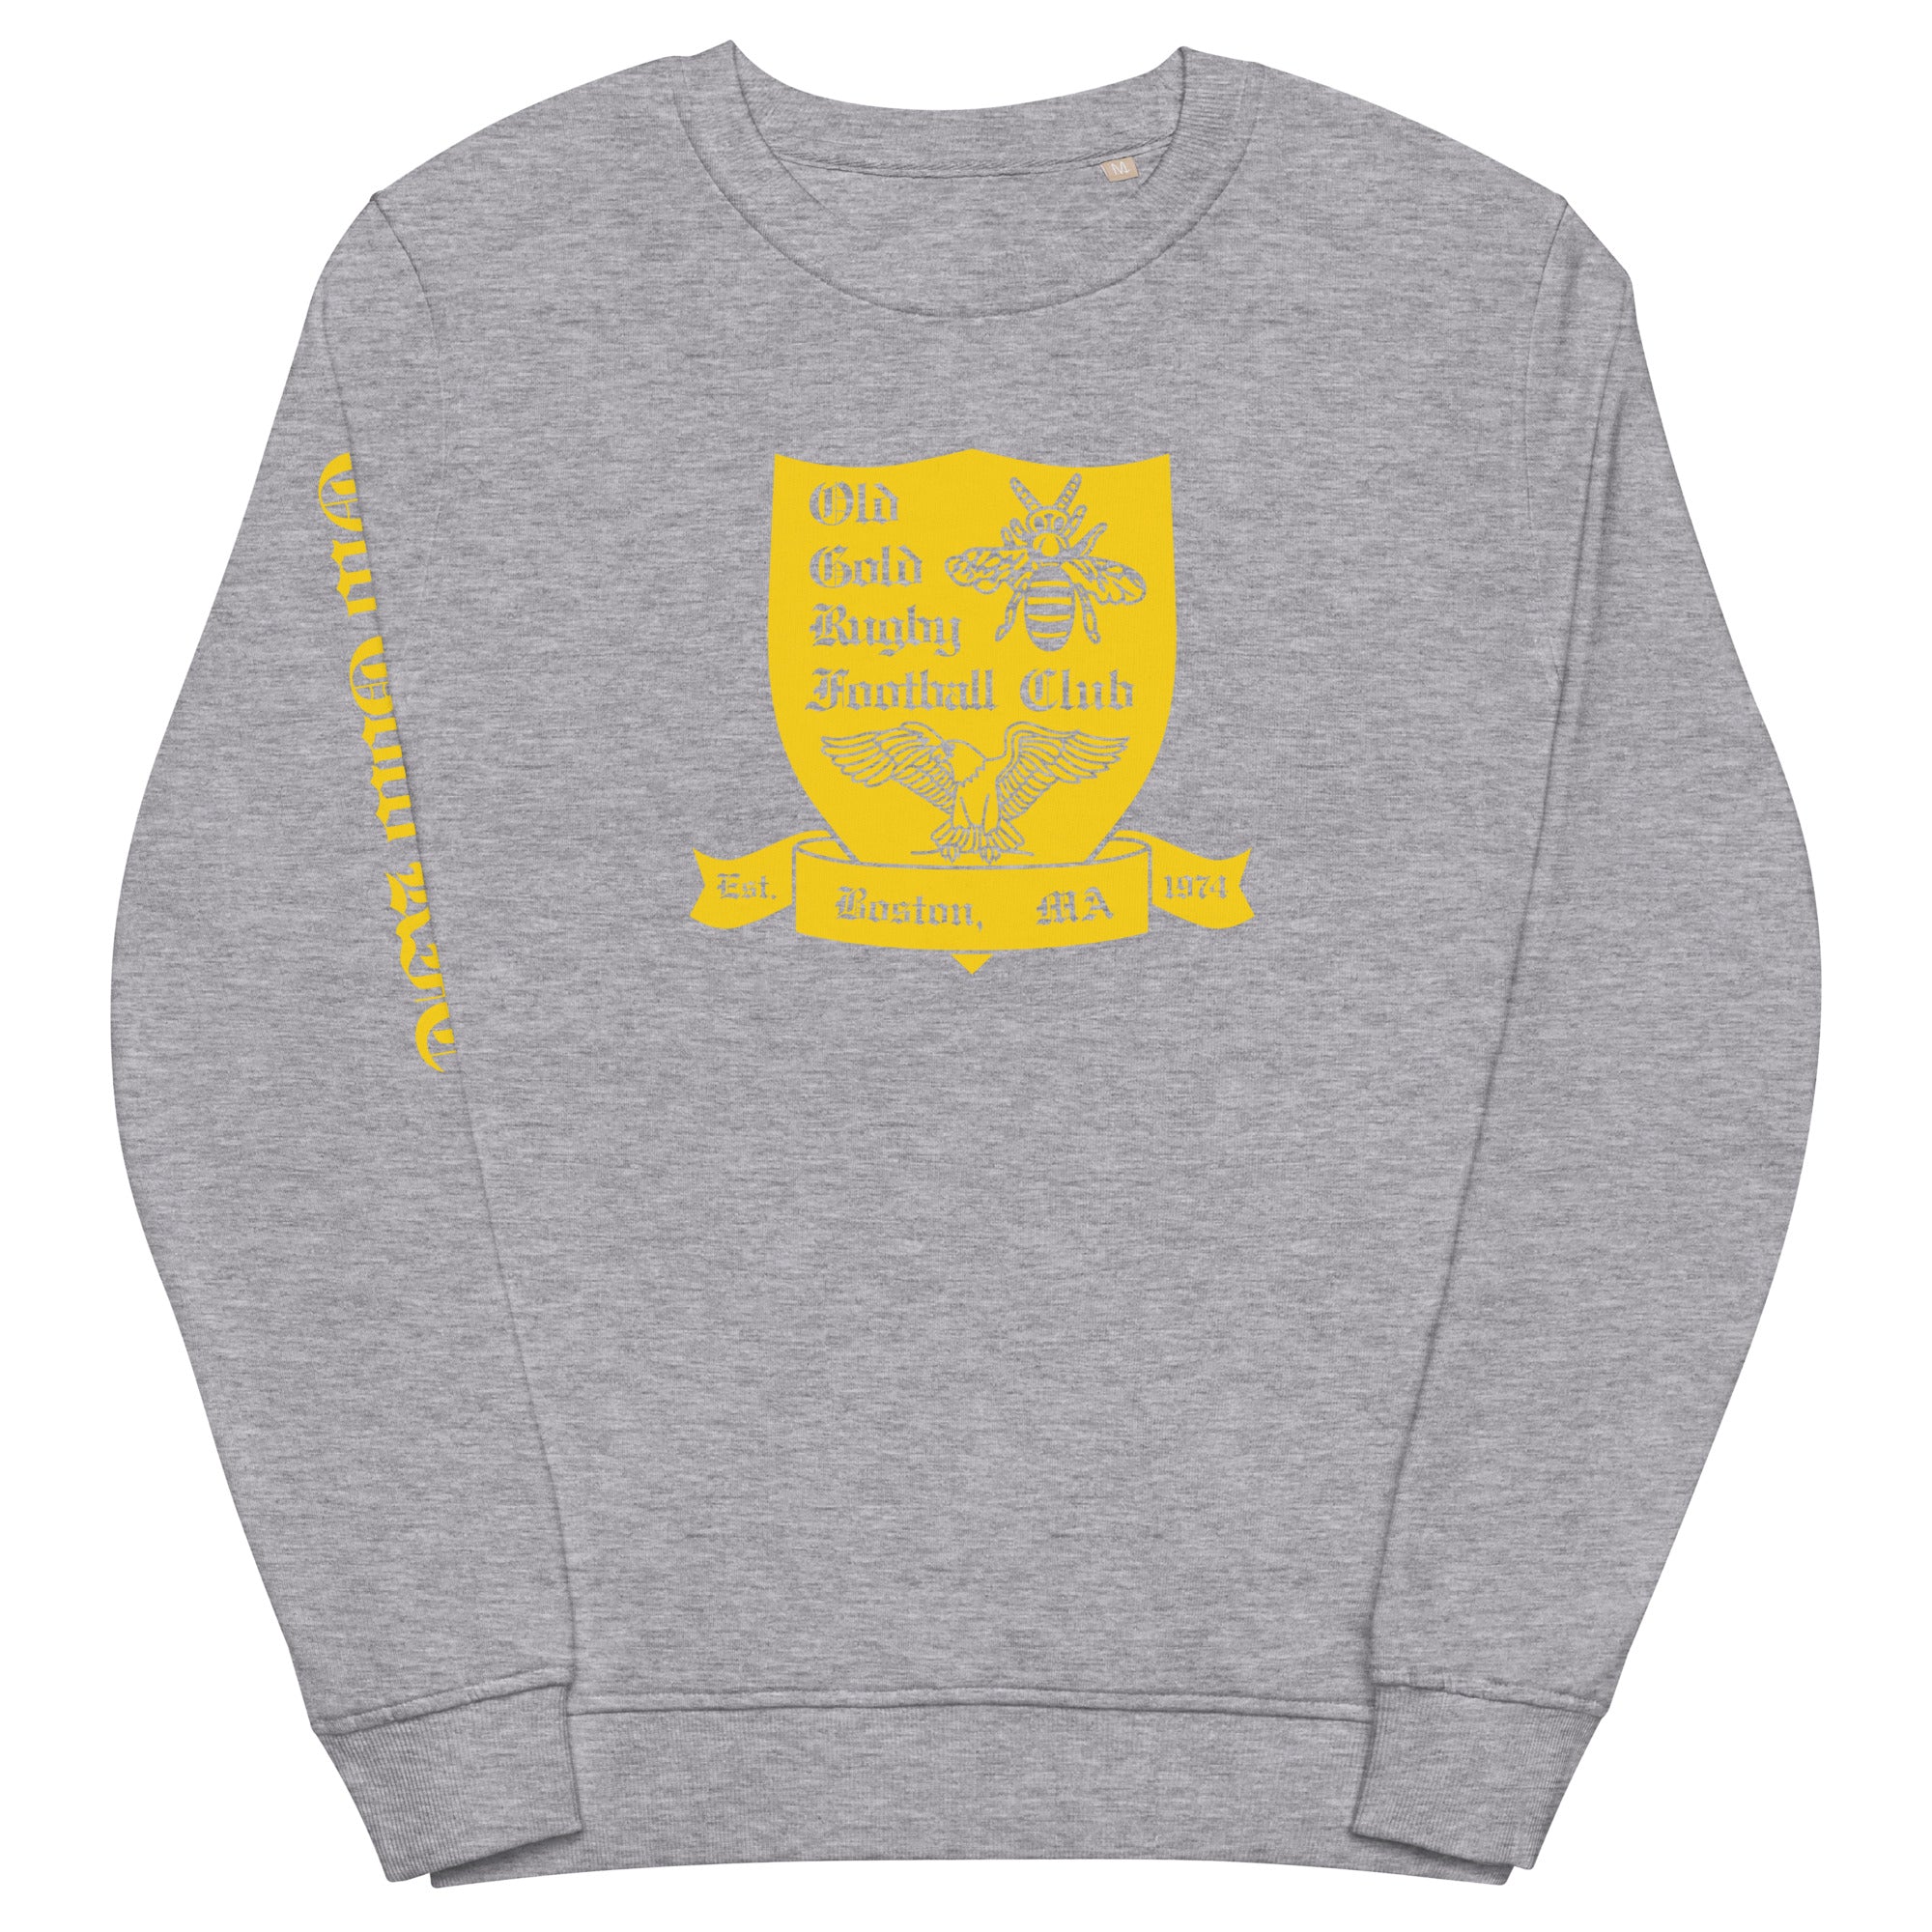 Rugby Imports Old Gold RFC Retro Crewneck